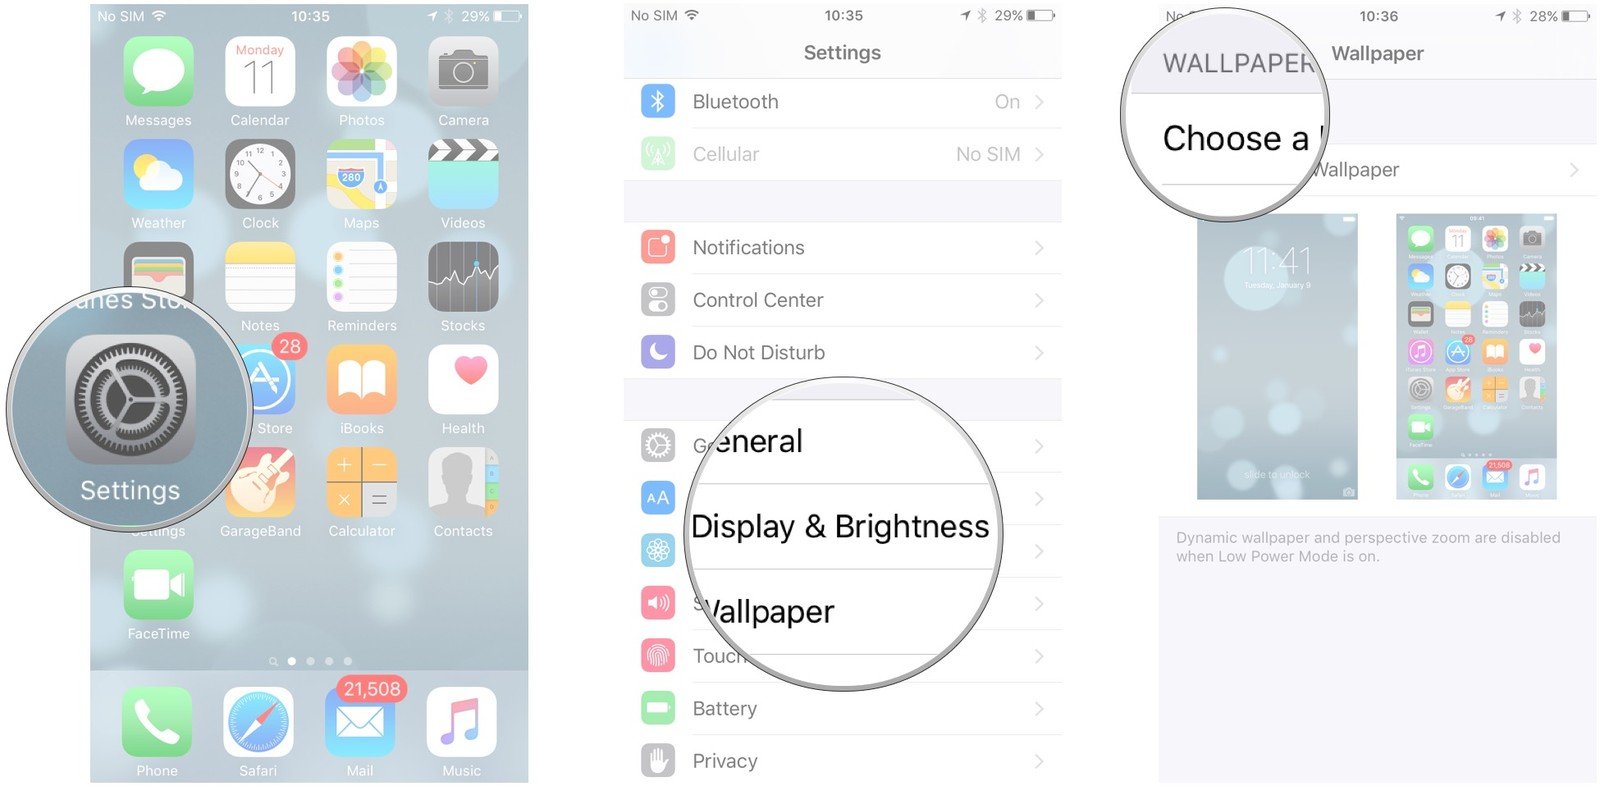 How to change your wallpaper on iPhone or iPad